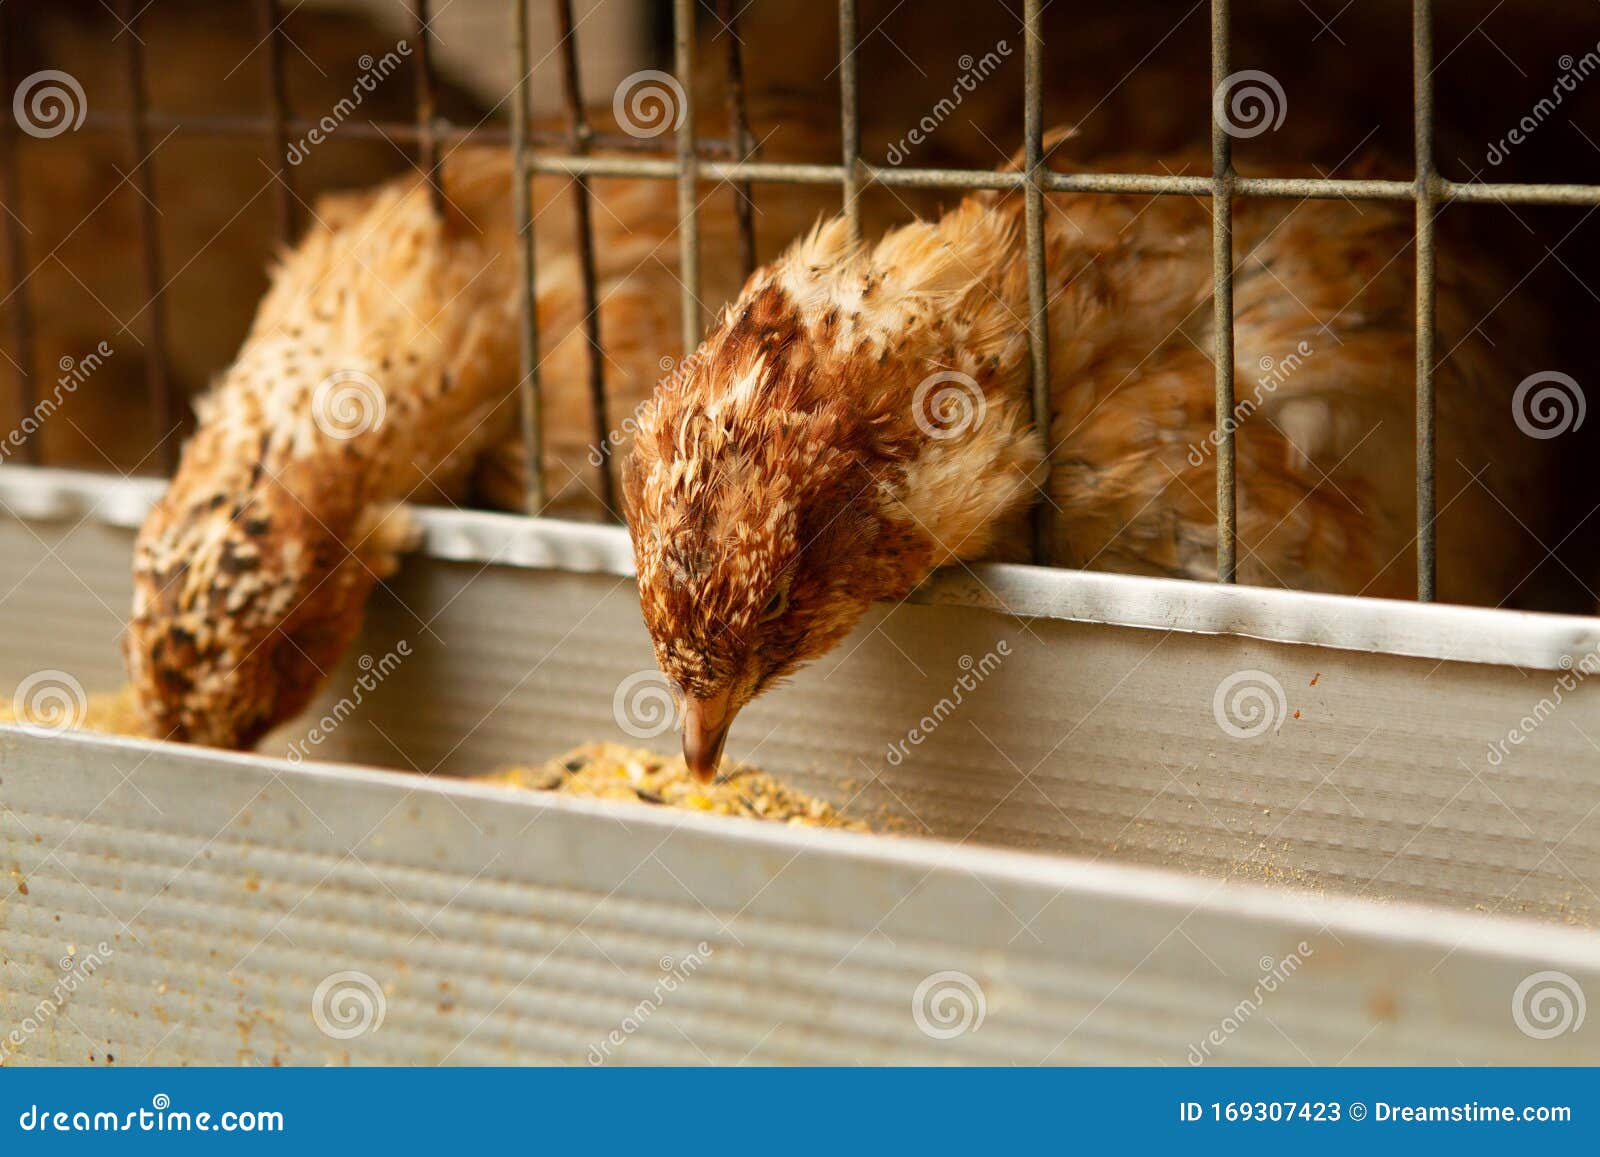 young quail fattening in cages on a quail farm